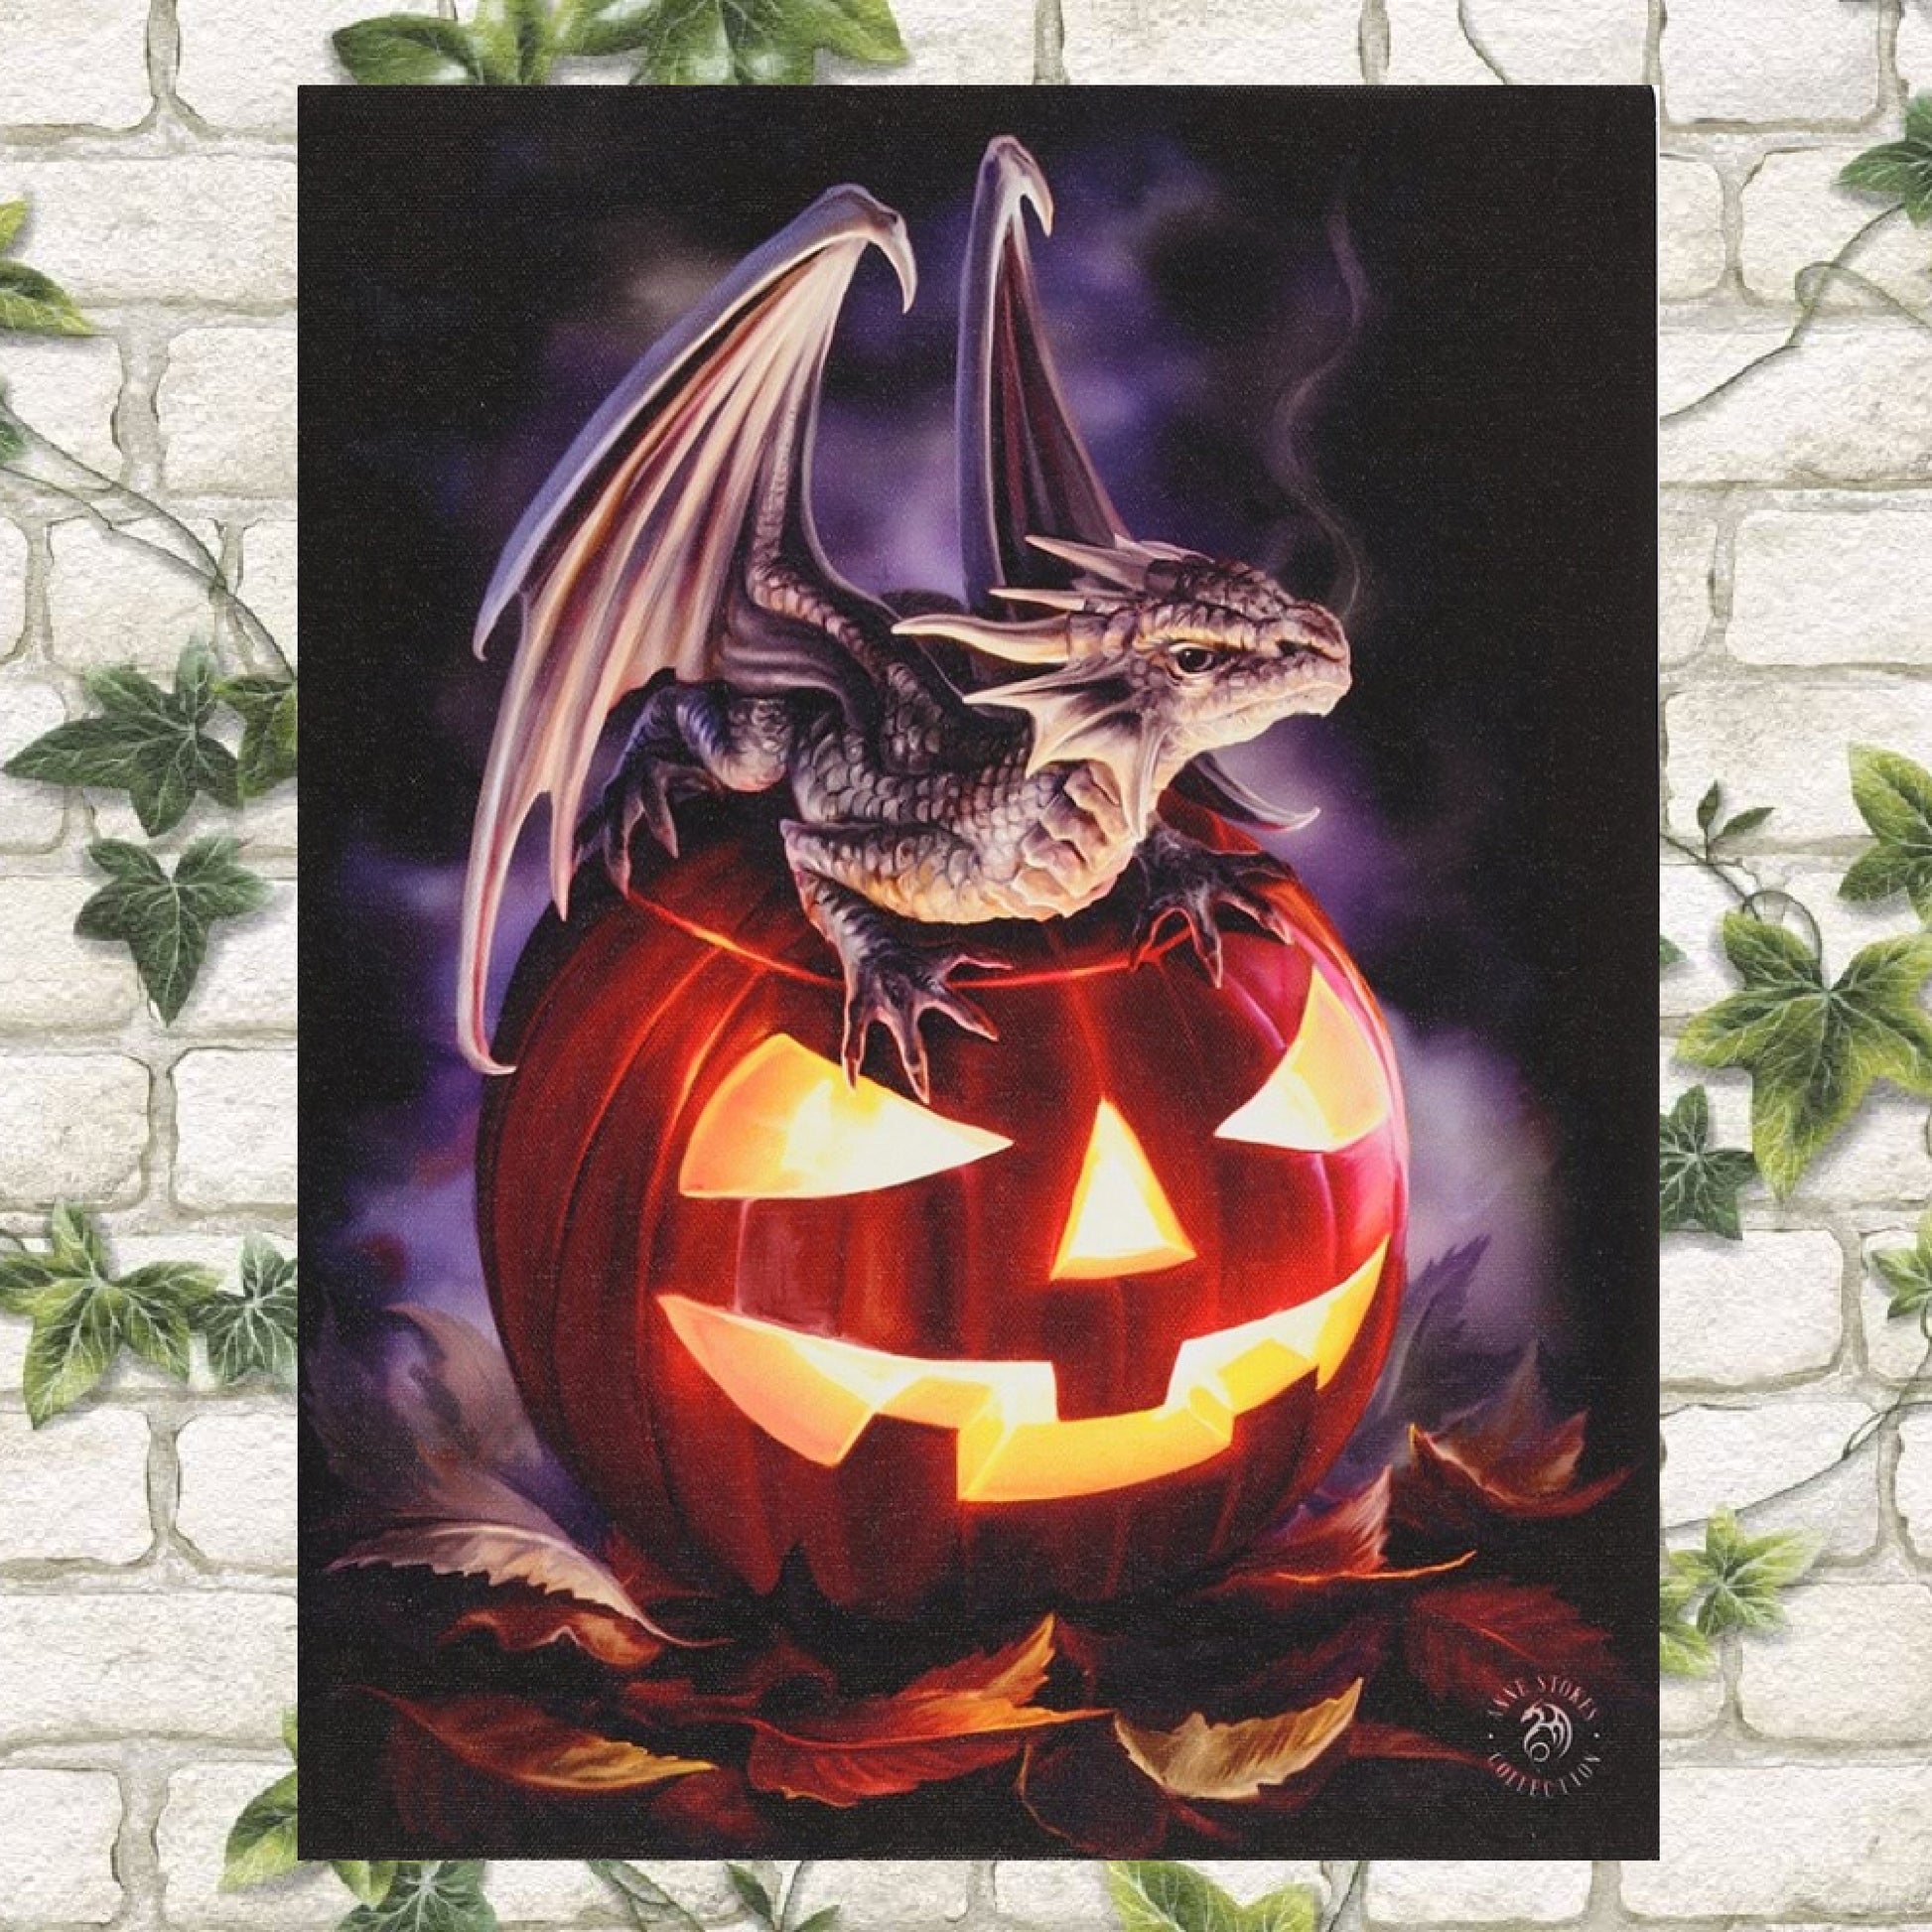 25cm x 19cm This stunningly detailed illustration is by the renowned Fantasy Artist Anne Stokes and features her Trick or Treat artwork. A dragon rests on top of a carved out jack o lantern pumpkin.